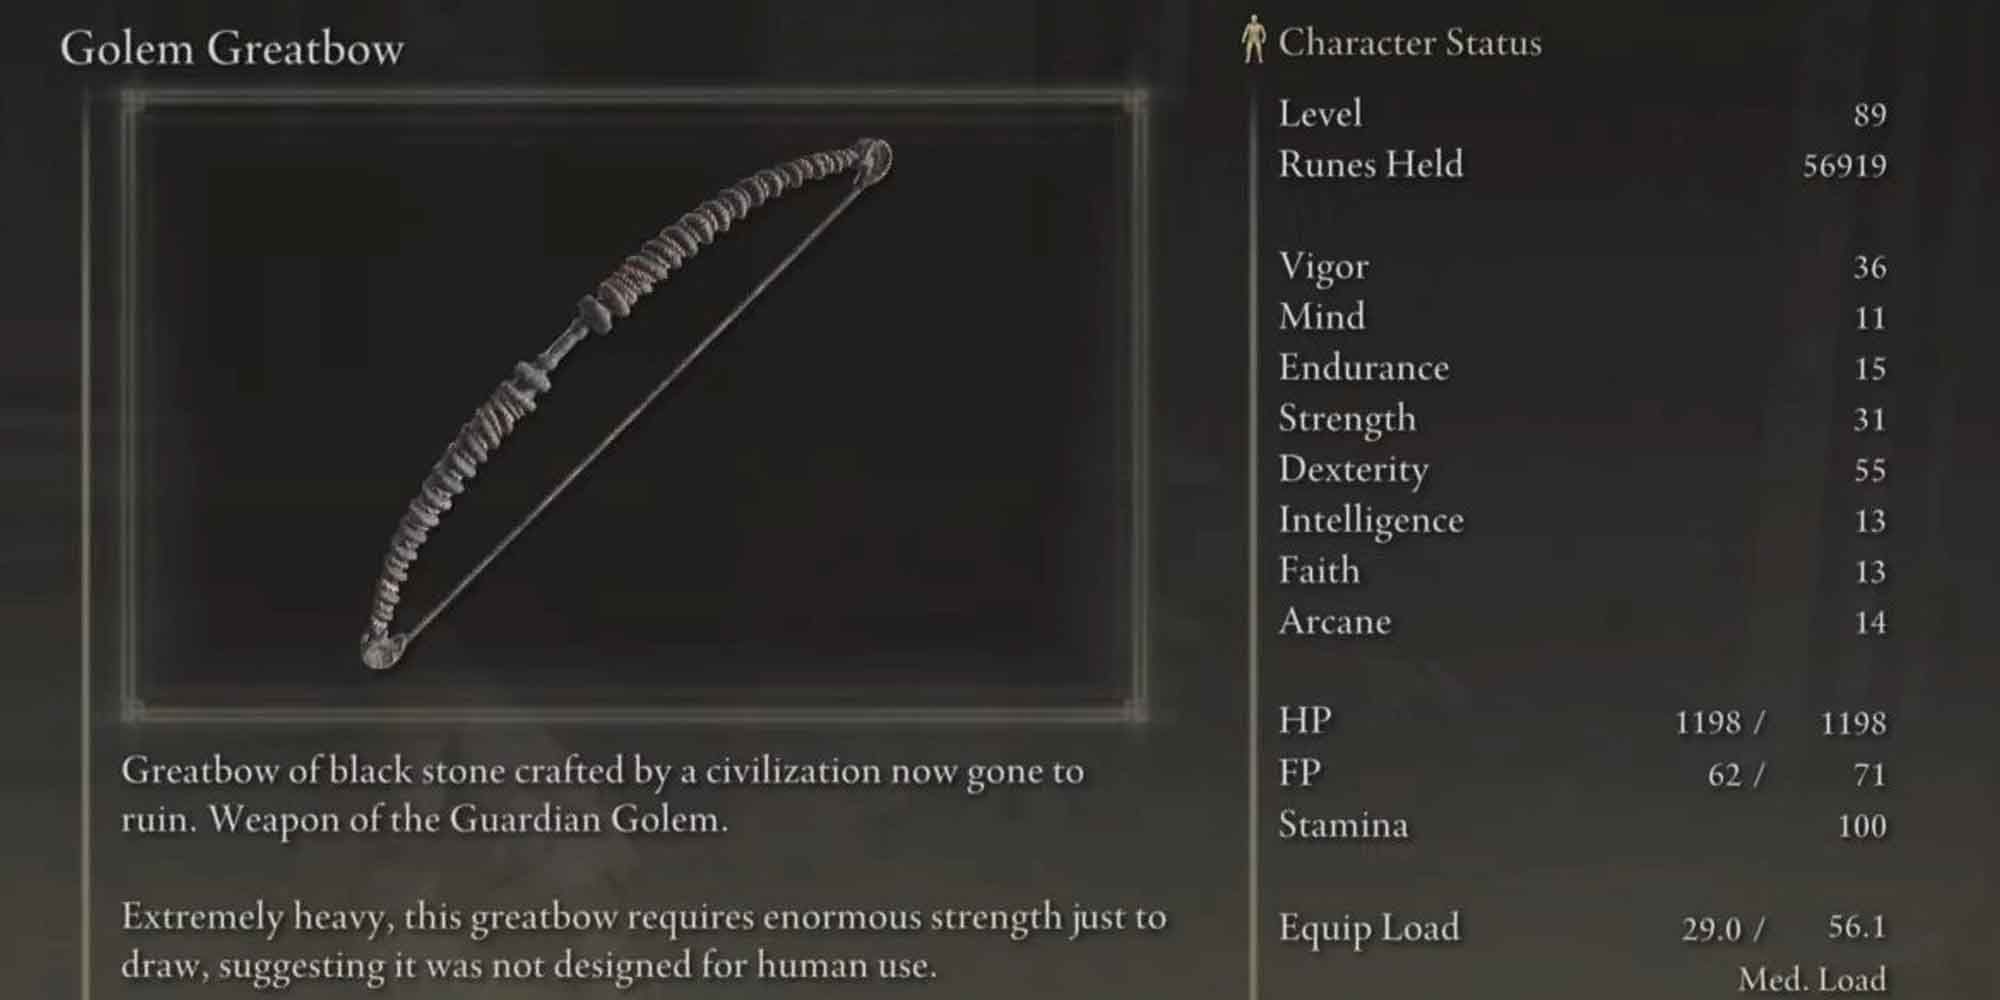 The Golem Greatbow in Elden Ring